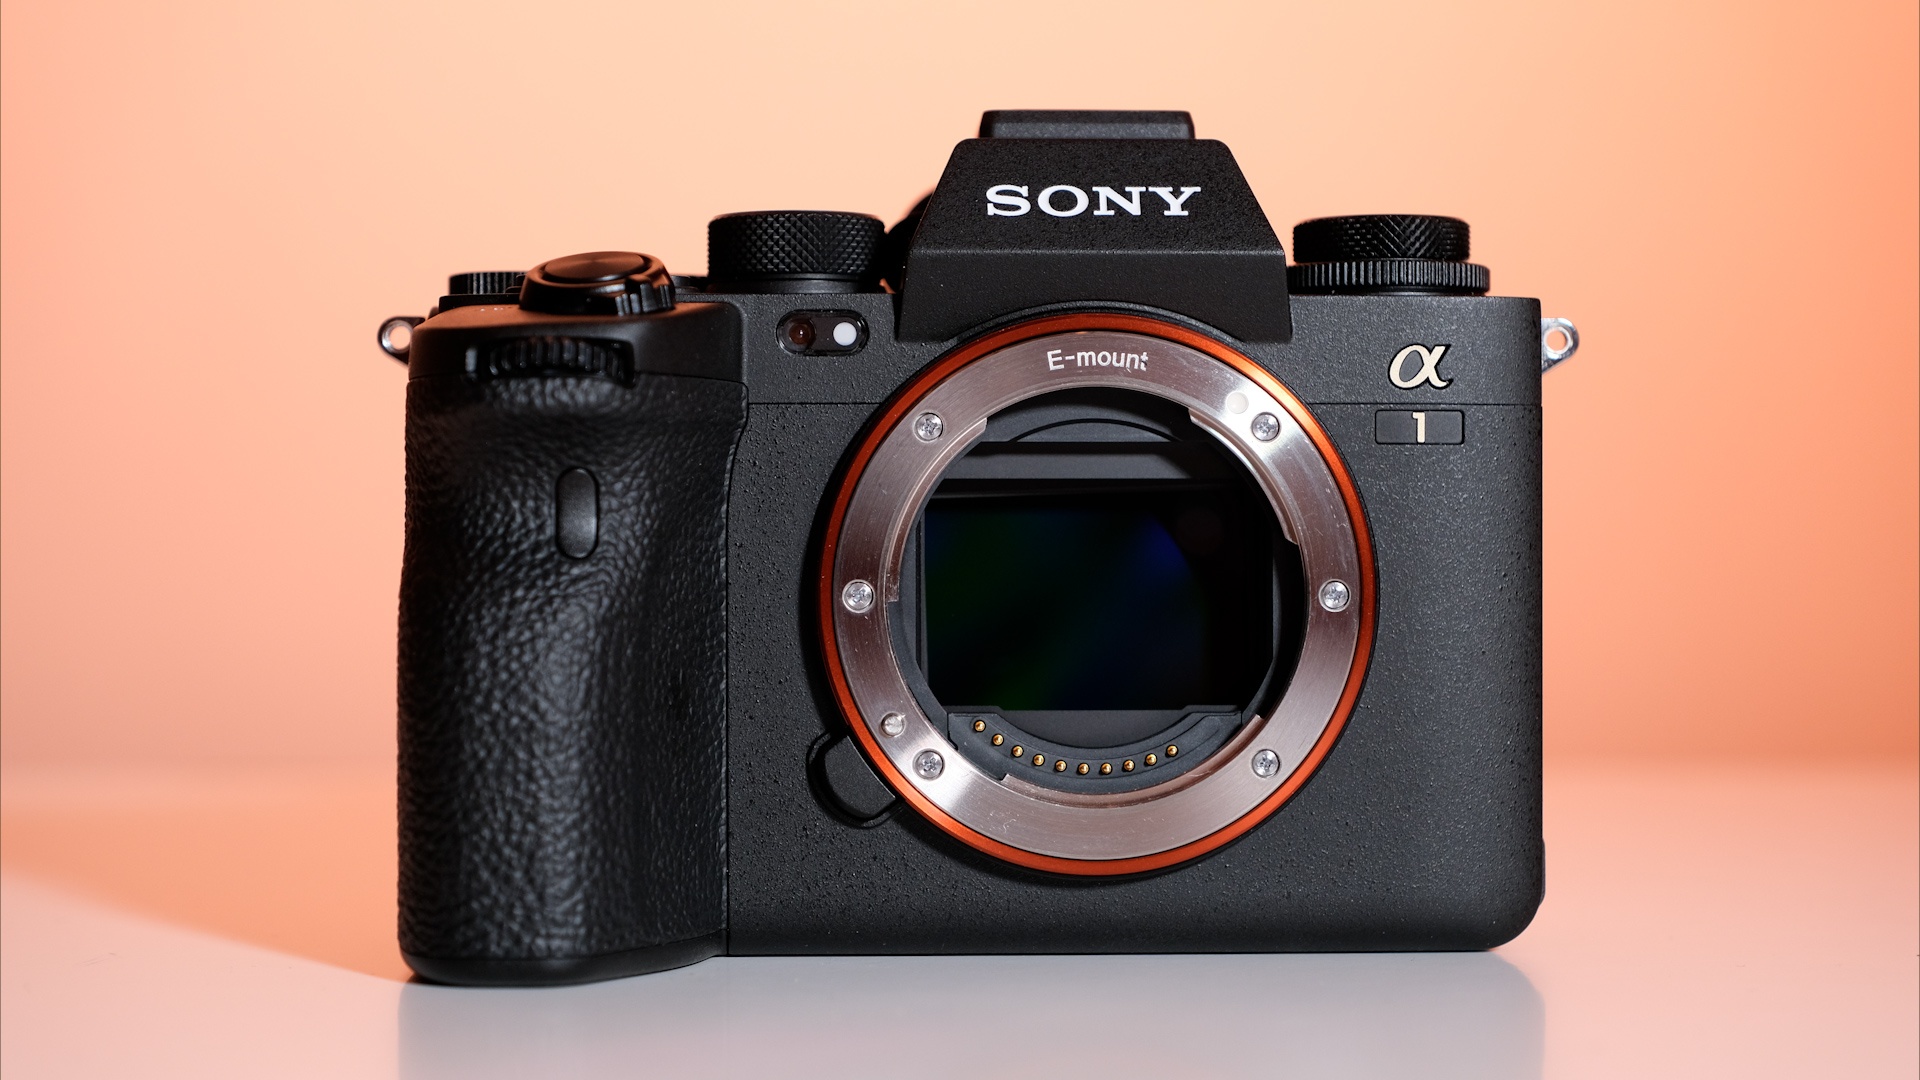 Sony Alpha 1 review: everything nice at an expensive price - The Verge